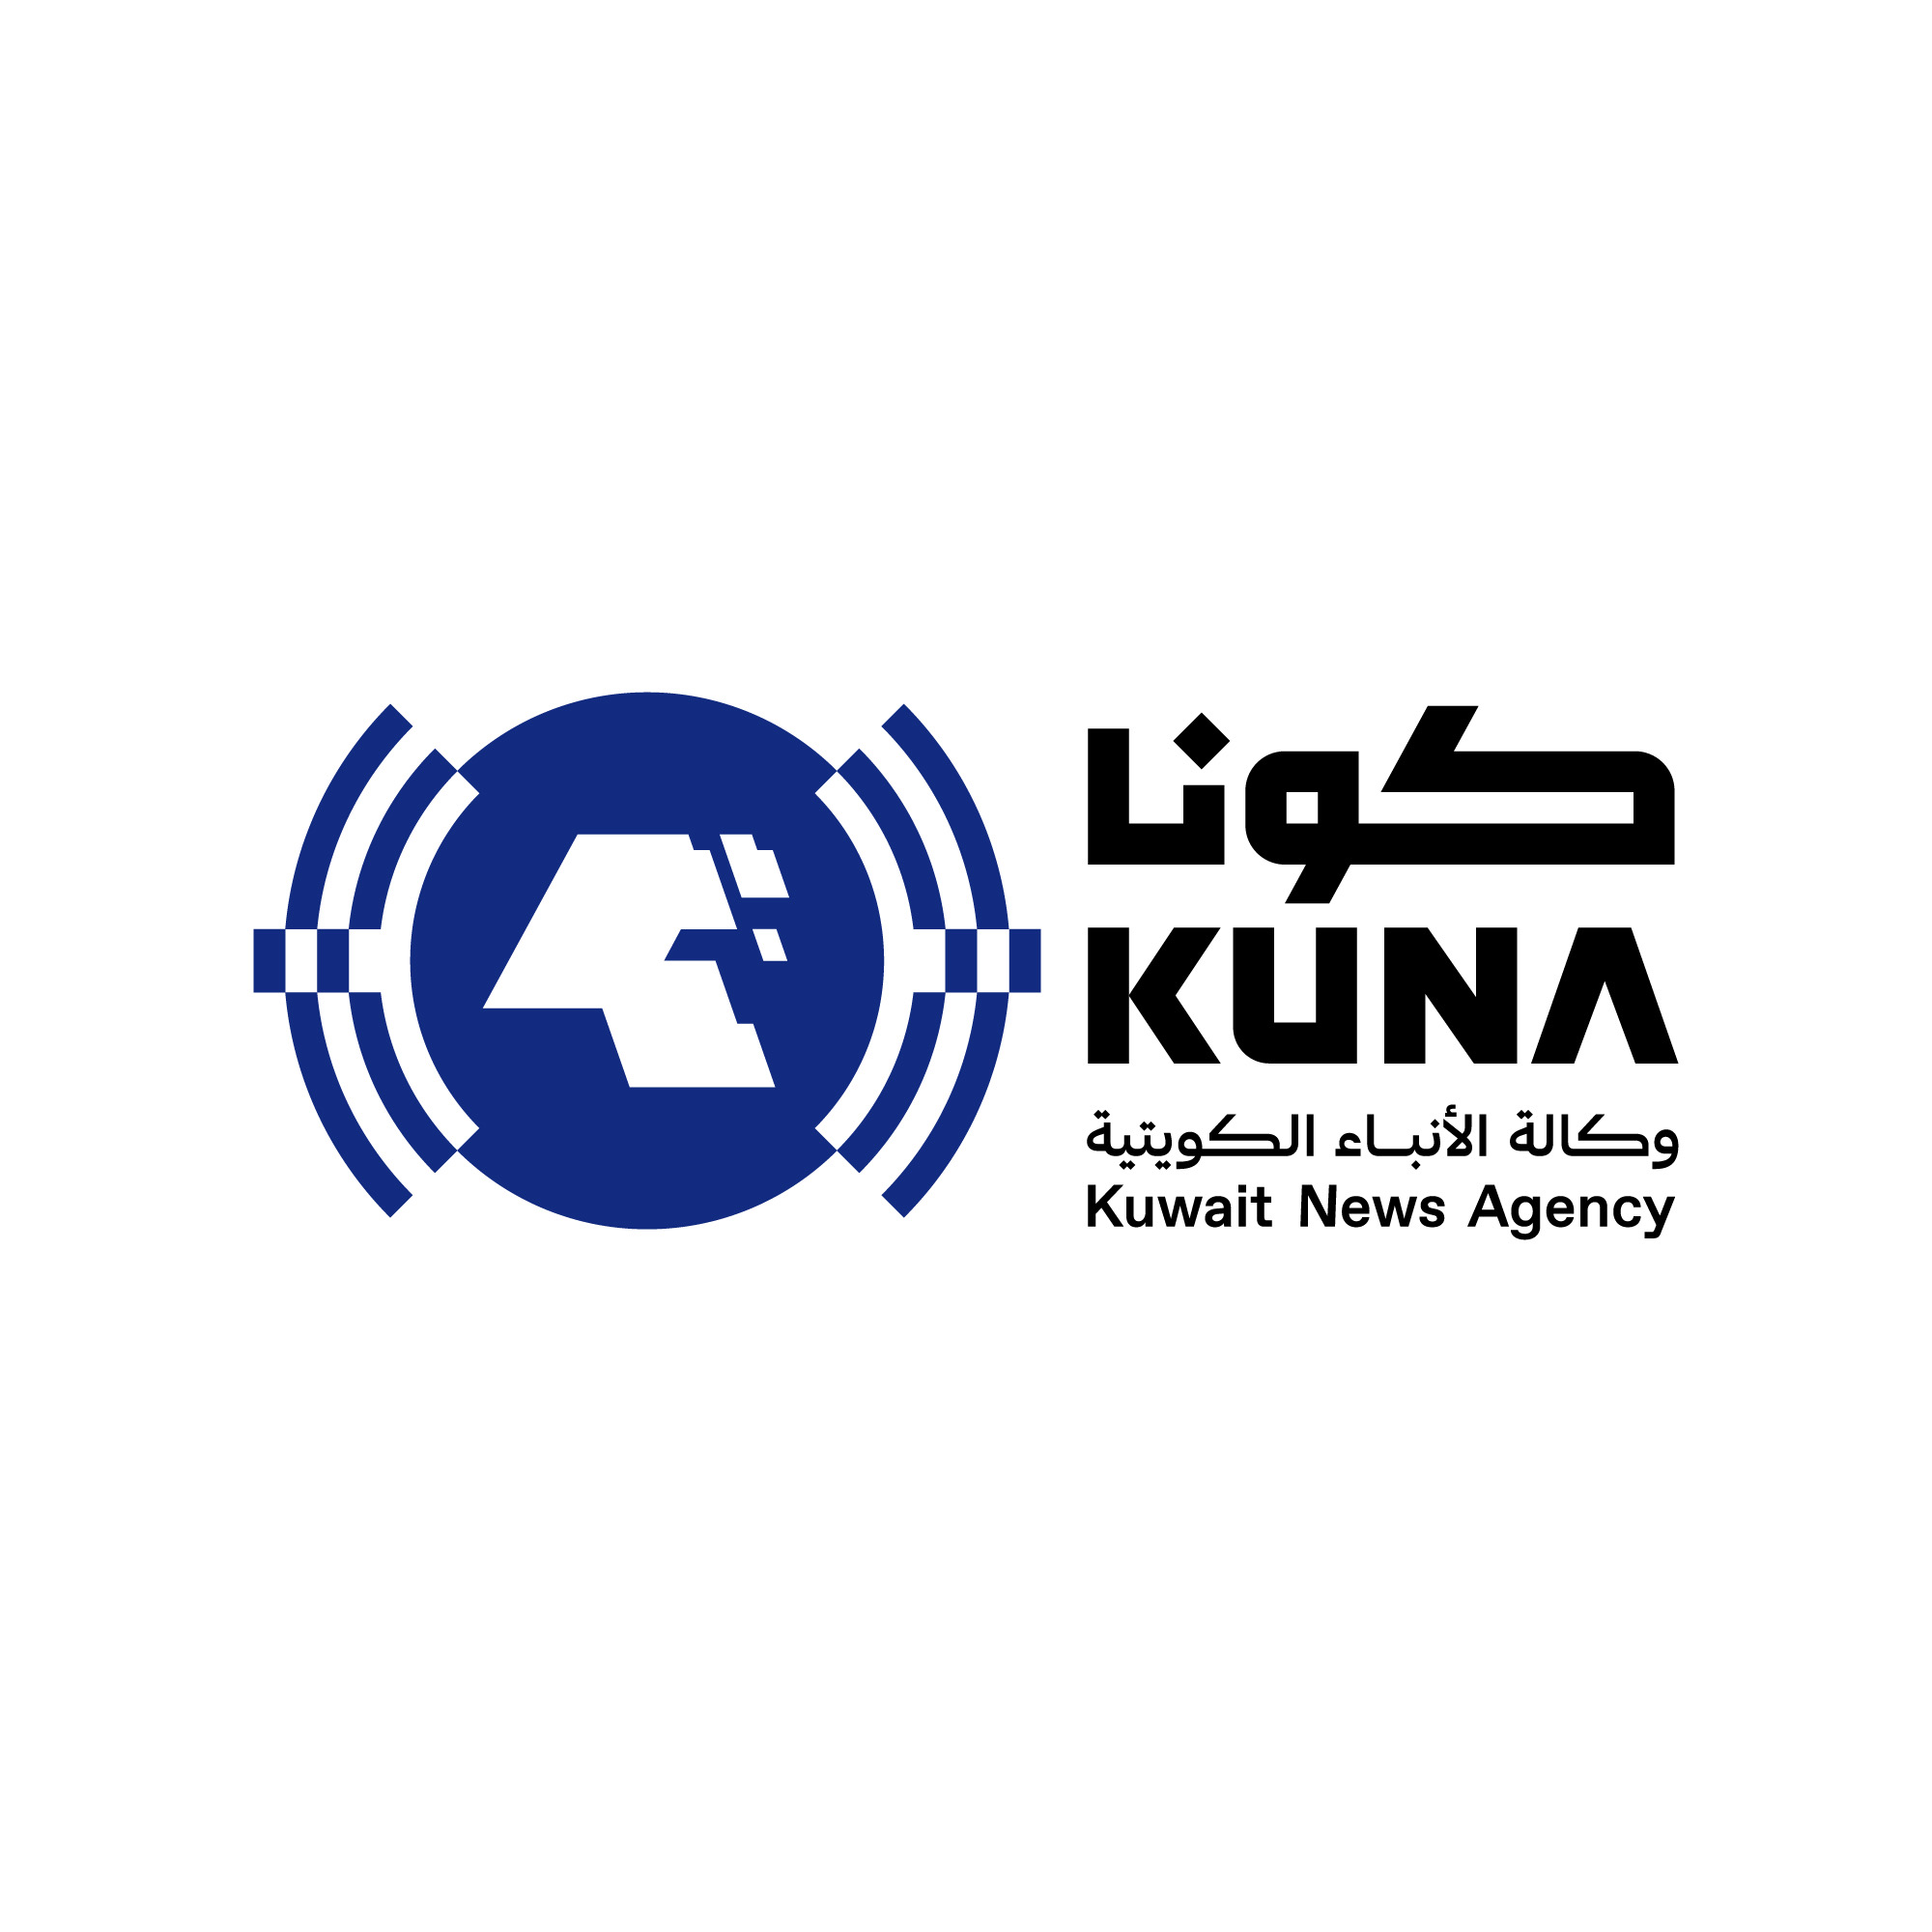 Briefing of KUNA main news for Thursday until 00:00 GMT                                                                                                                                                                                                   